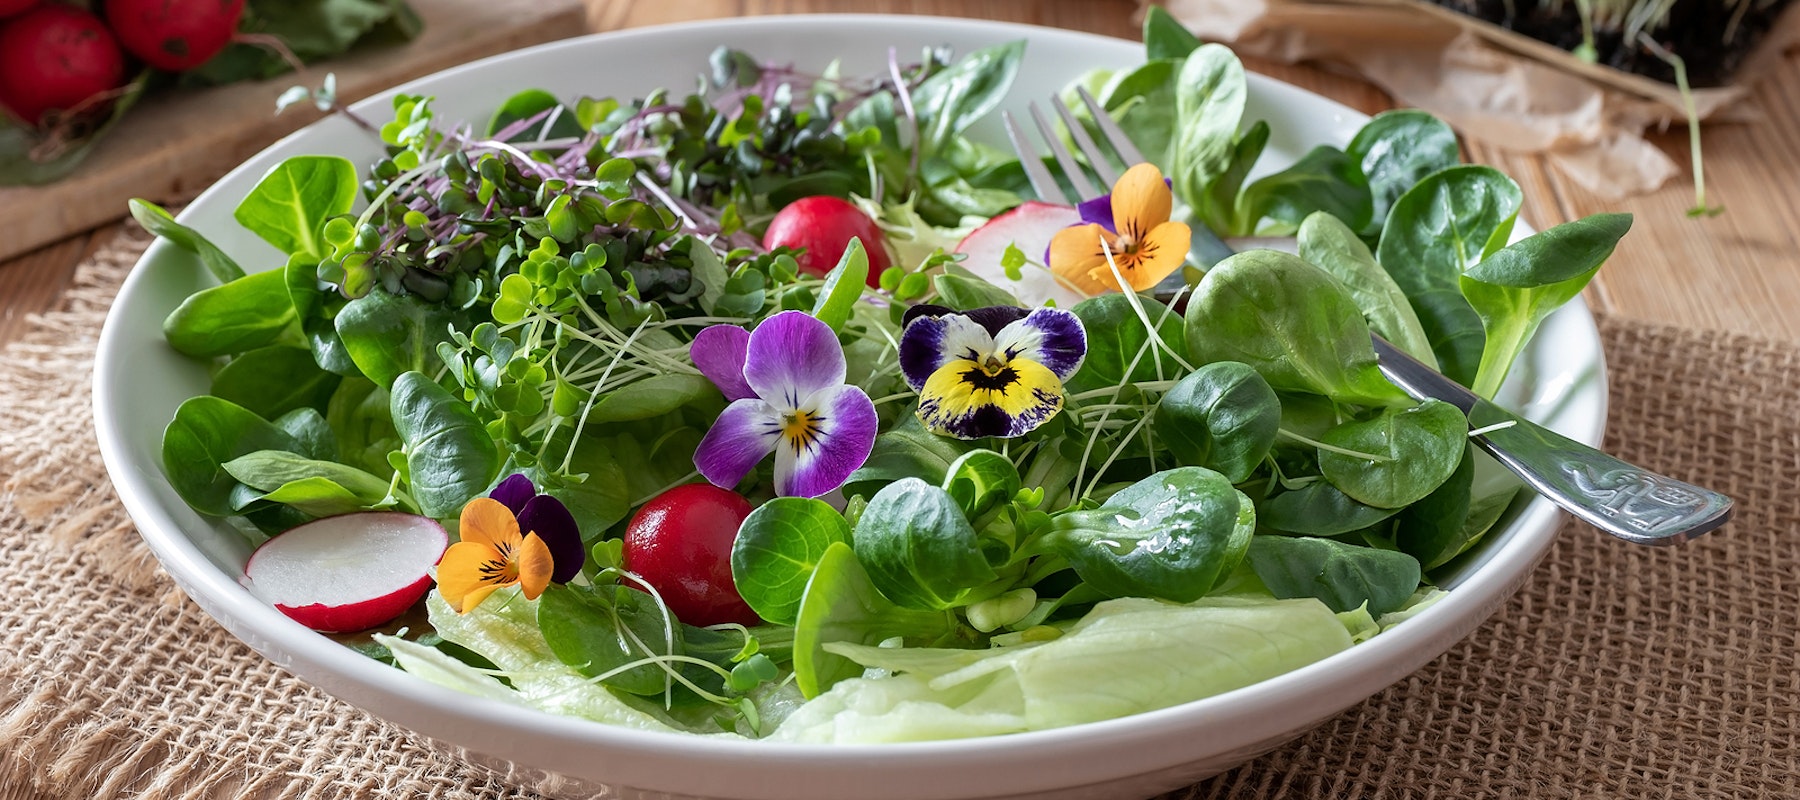 Bigstock-Salad-With-Edible-Pansies-And--287480701